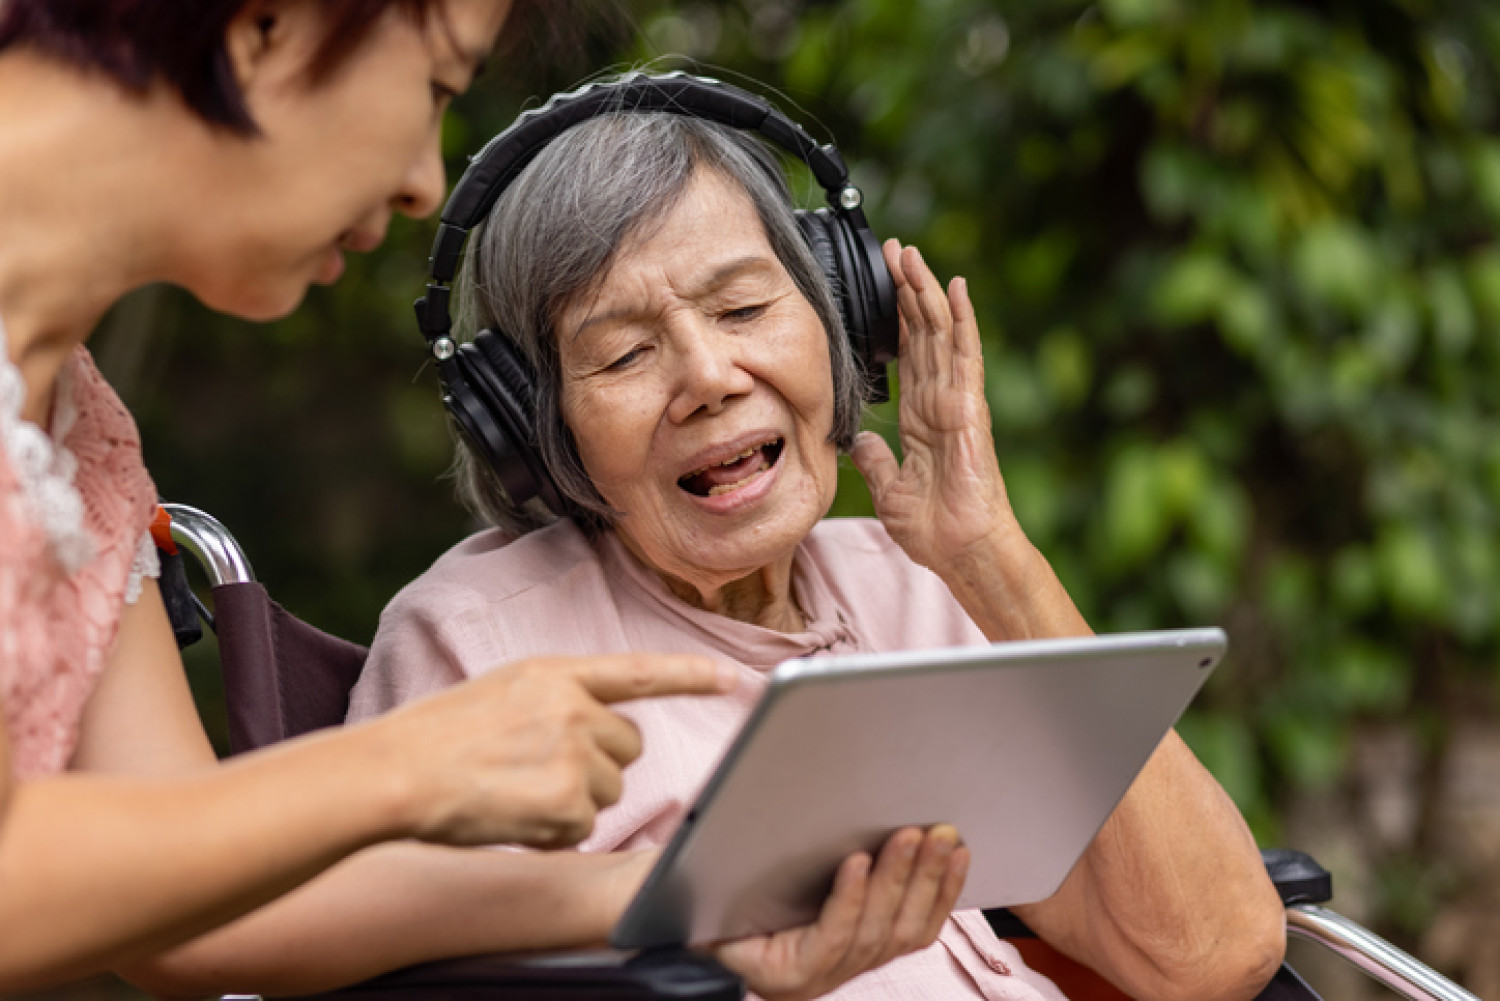 Elderly woman with dementia uses tablet and headphones in music therapy.